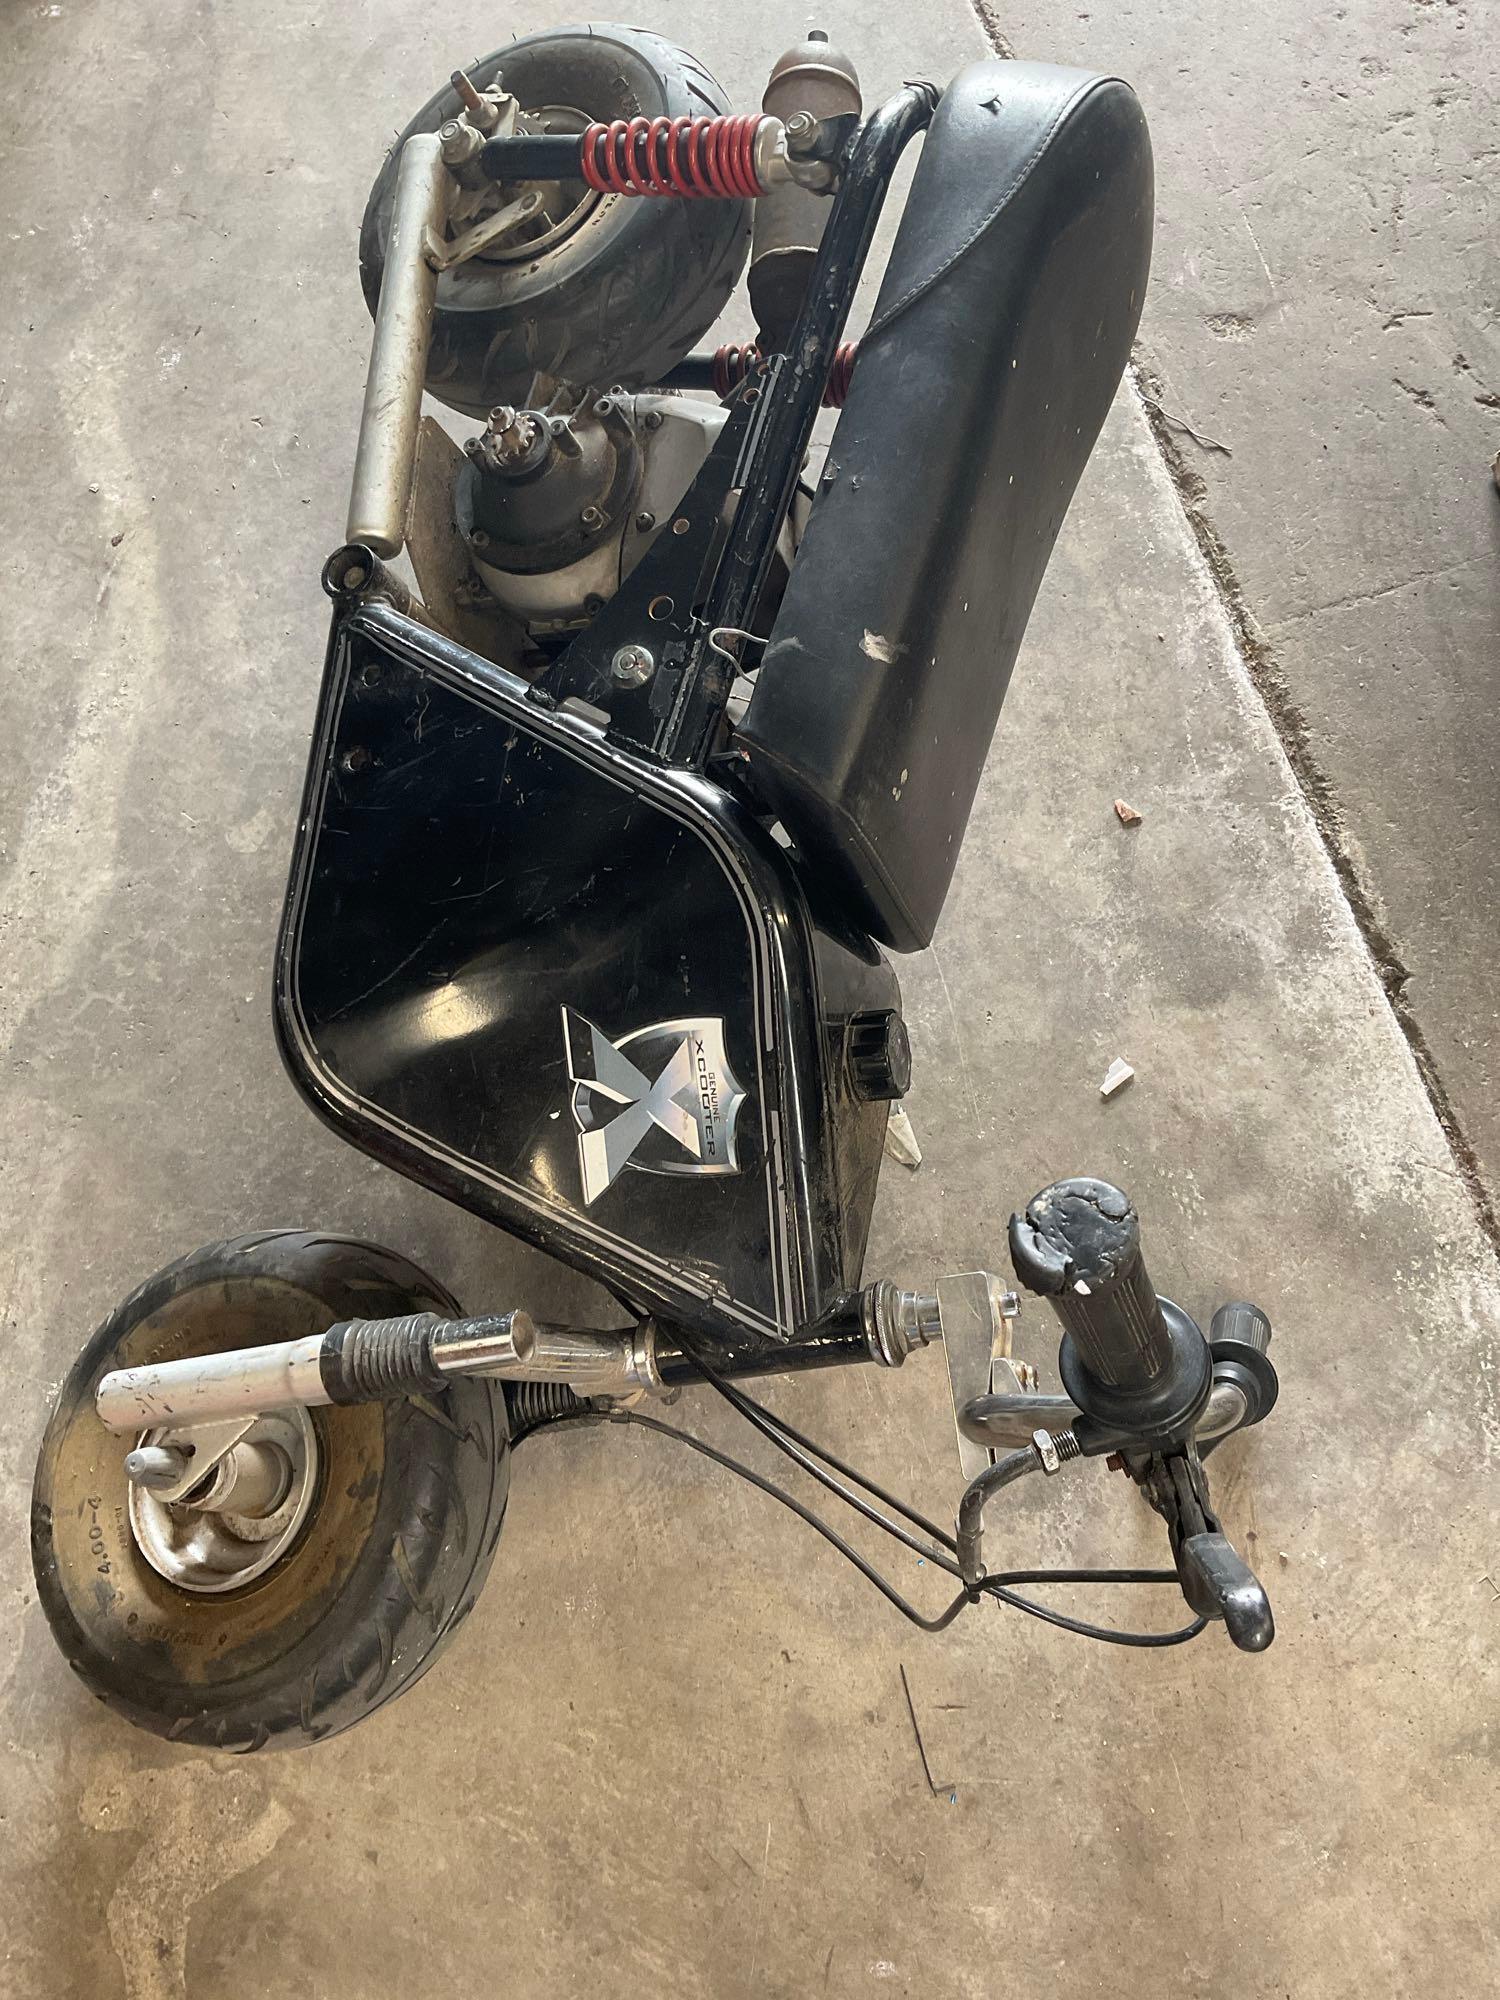 Untested mini bike, emblems are from Genuin Xcooter